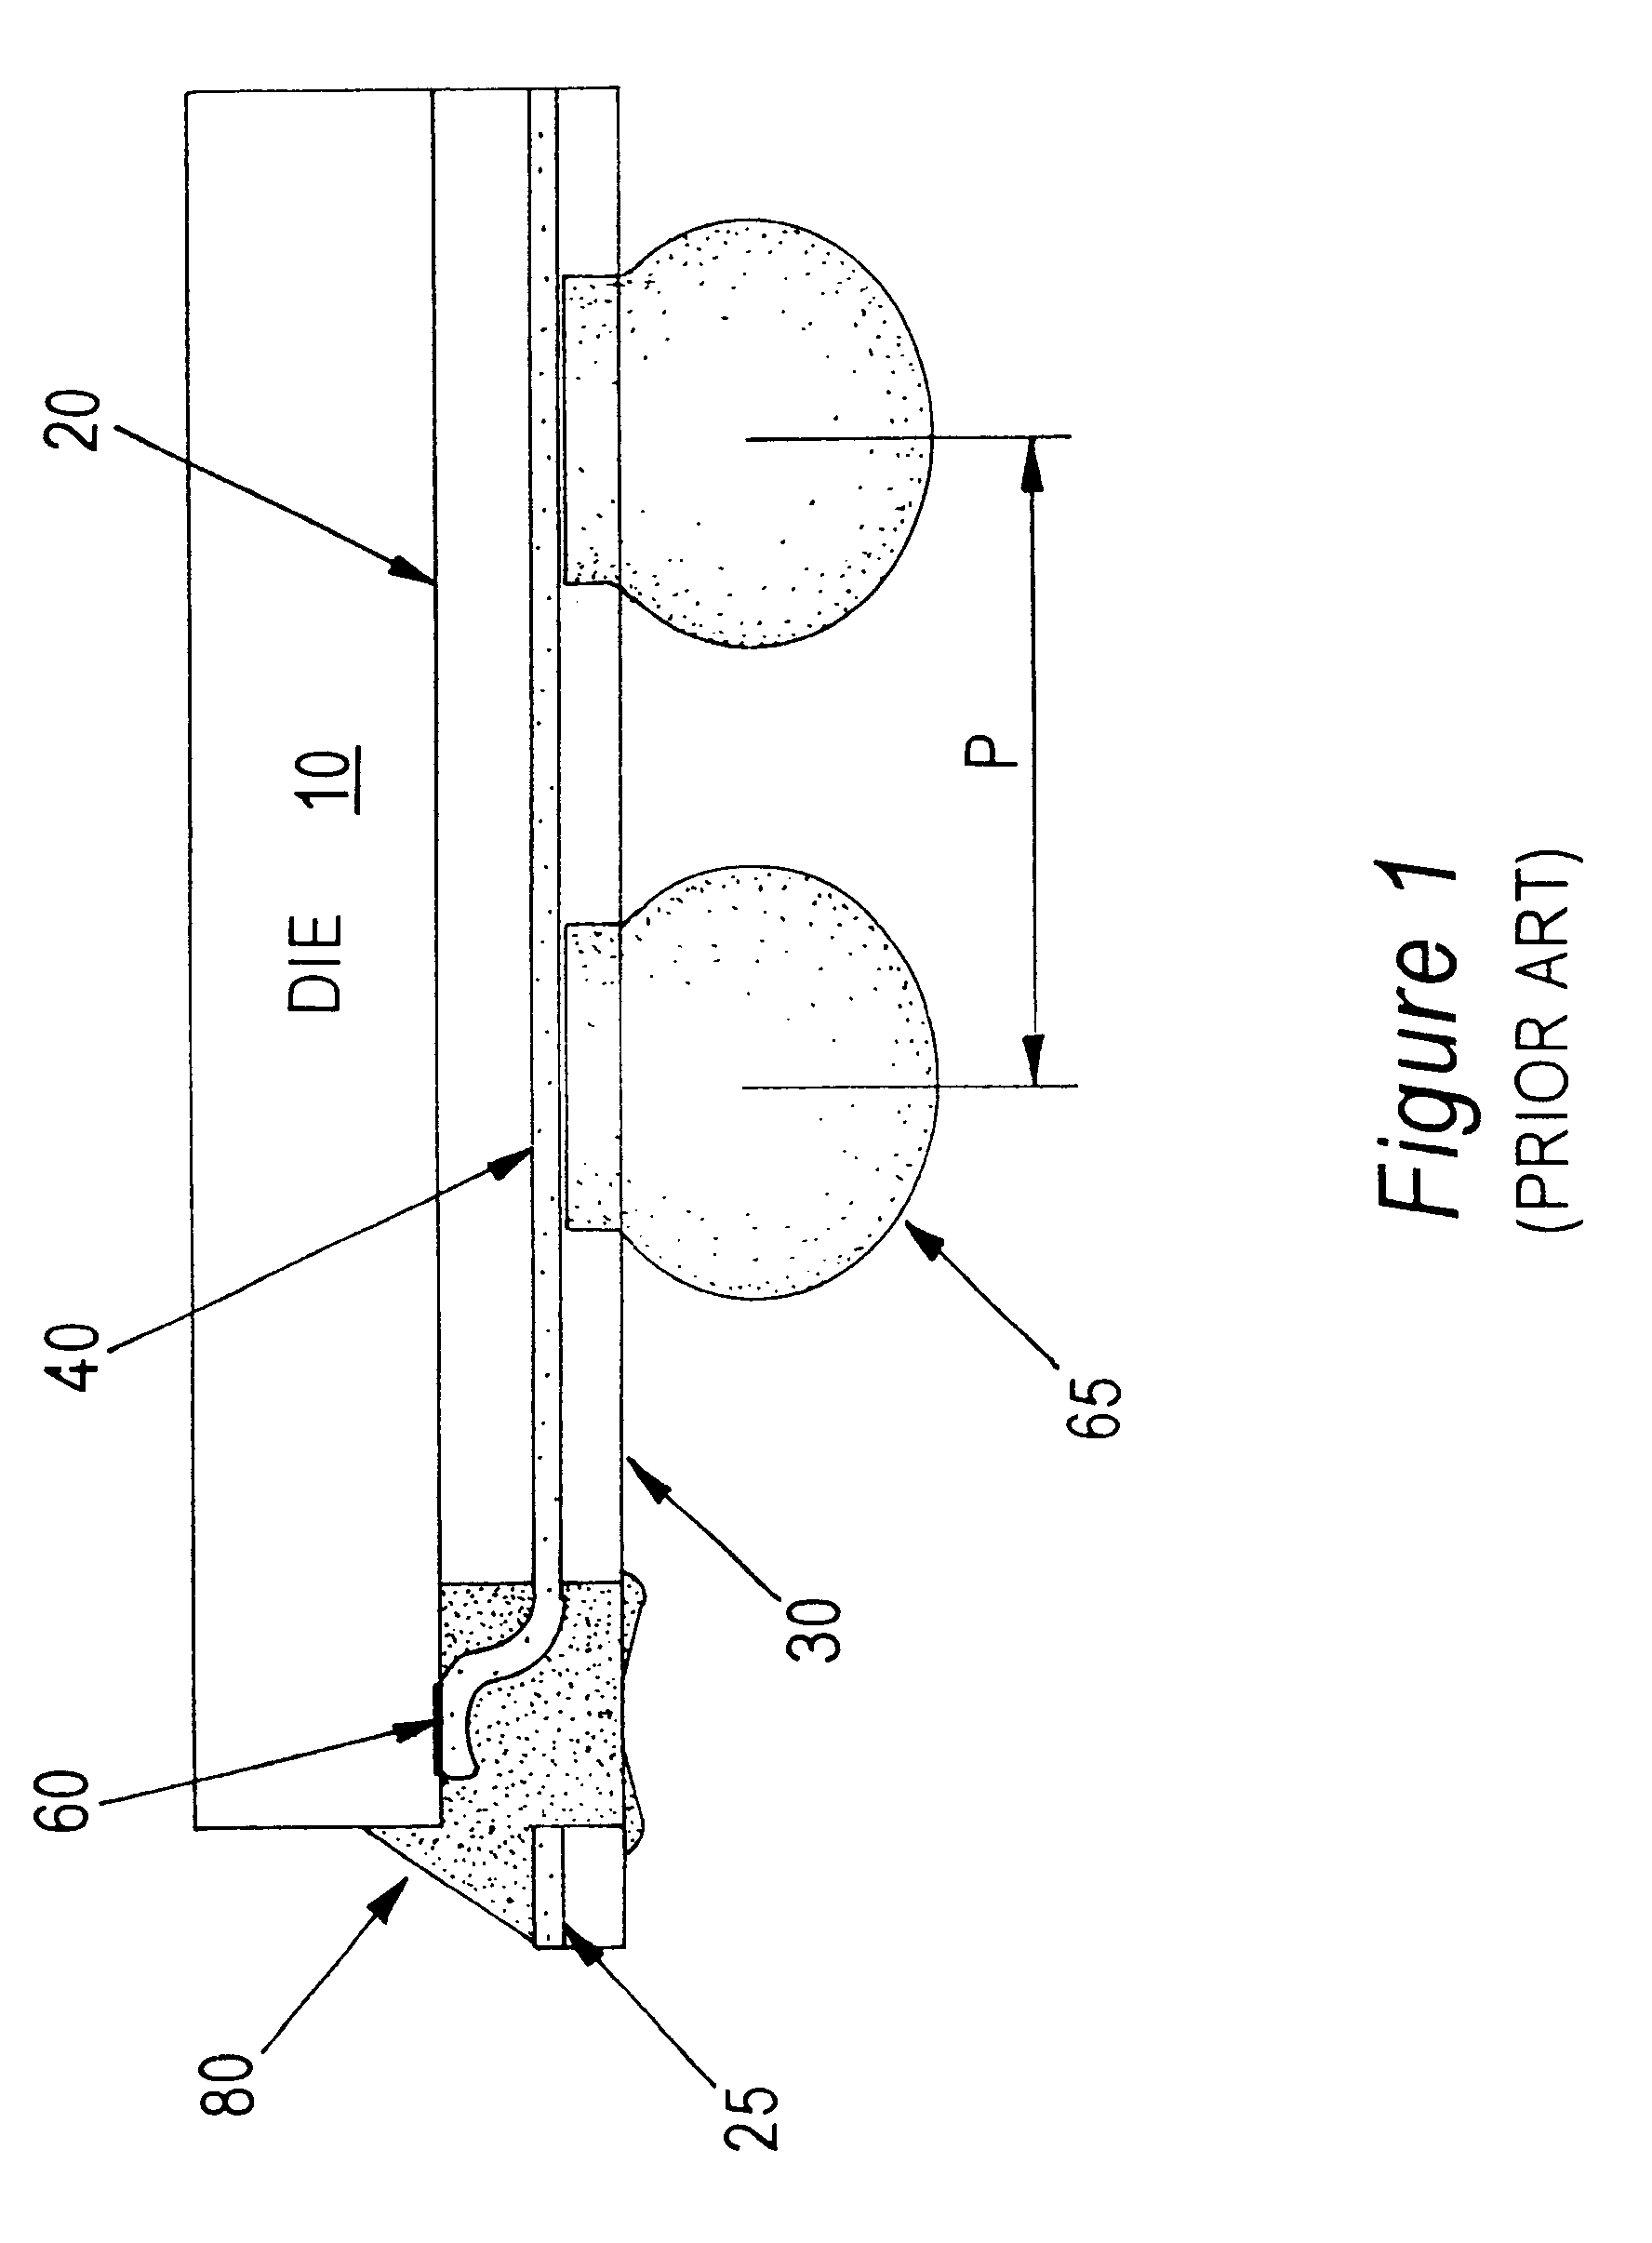 Micro-BGA beam lead connection with cantilevered beam leads